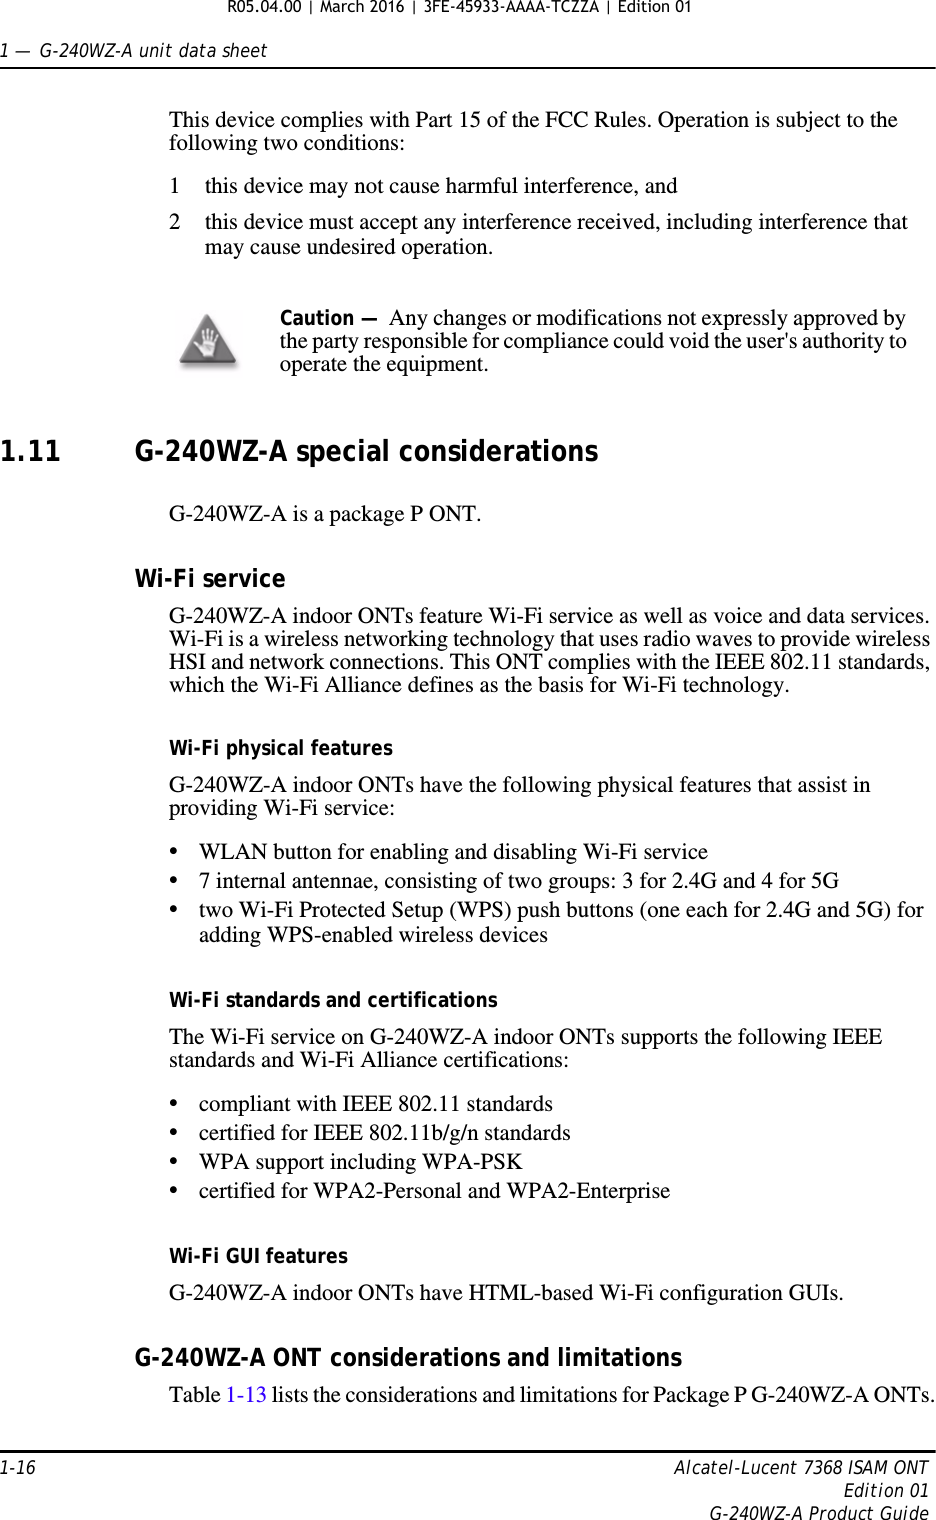 1 —  G-240WZ-A unit data sheet1-16 Alcatel-Lucent 7368 ISAM ONTEdition 01G-240WZ-A Product GuideThis device complies with Part 15 of the FCC Rules. Operation is subject to the following two conditions: 1 this device may not cause harmful interference, and 2 this device must accept any interference received, including interference that may cause undesired operation. 1.11 G-240WZ-A special considerationsG-240WZ-A is a package P ONT.Wi-Fi serviceG-240WZ-A indoor ONTs feature Wi-Fi service as well as voice and data services. Wi-Fi is a wireless networking technology that uses radio waves to provide wireless HSI and network connections. This ONT complies with the IEEE 802.11 standards, which the Wi-Fi Alliance defines as the basis for Wi-Fi technology. Wi-Fi physical featuresG-240WZ-A indoor ONTs have the following physical features that assist in providing Wi-Fi service: •WLAN button for enabling and disabling Wi-Fi service •7 internal antennae, consisting of two groups: 3 for 2.4G and 4 for 5G•two Wi-Fi Protected Setup (WPS) push buttons (one each for 2.4G and 5G) for adding WPS-enabled wireless devicesWi-Fi standards and certificationsThe Wi-Fi service on G-240WZ-A indoor ONTs supports the following IEEE standards and Wi-Fi Alliance certifications:•compliant with IEEE 802.11 standards•certified for IEEE 802.11b/g/n standards •WPA support including WPA-PSK•certified for WPA2-Personal and WPA2-EnterpriseWi-Fi GUI featuresG-240WZ-A indoor ONTs have HTML-based Wi-Fi configuration GUIs. G-240WZ-A ONT considerations and limitationsTable 1-13 lists the considerations and limitations for Package P G-240WZ-A ONTs.Caution —  Any changes or modifications not expressly approved by the party responsible for compliance could void the user&apos;s authority to operate the equipment. R05.04.00 | March 2016 | 3FE-45933-AAAA-TCZZA | Edition 01 